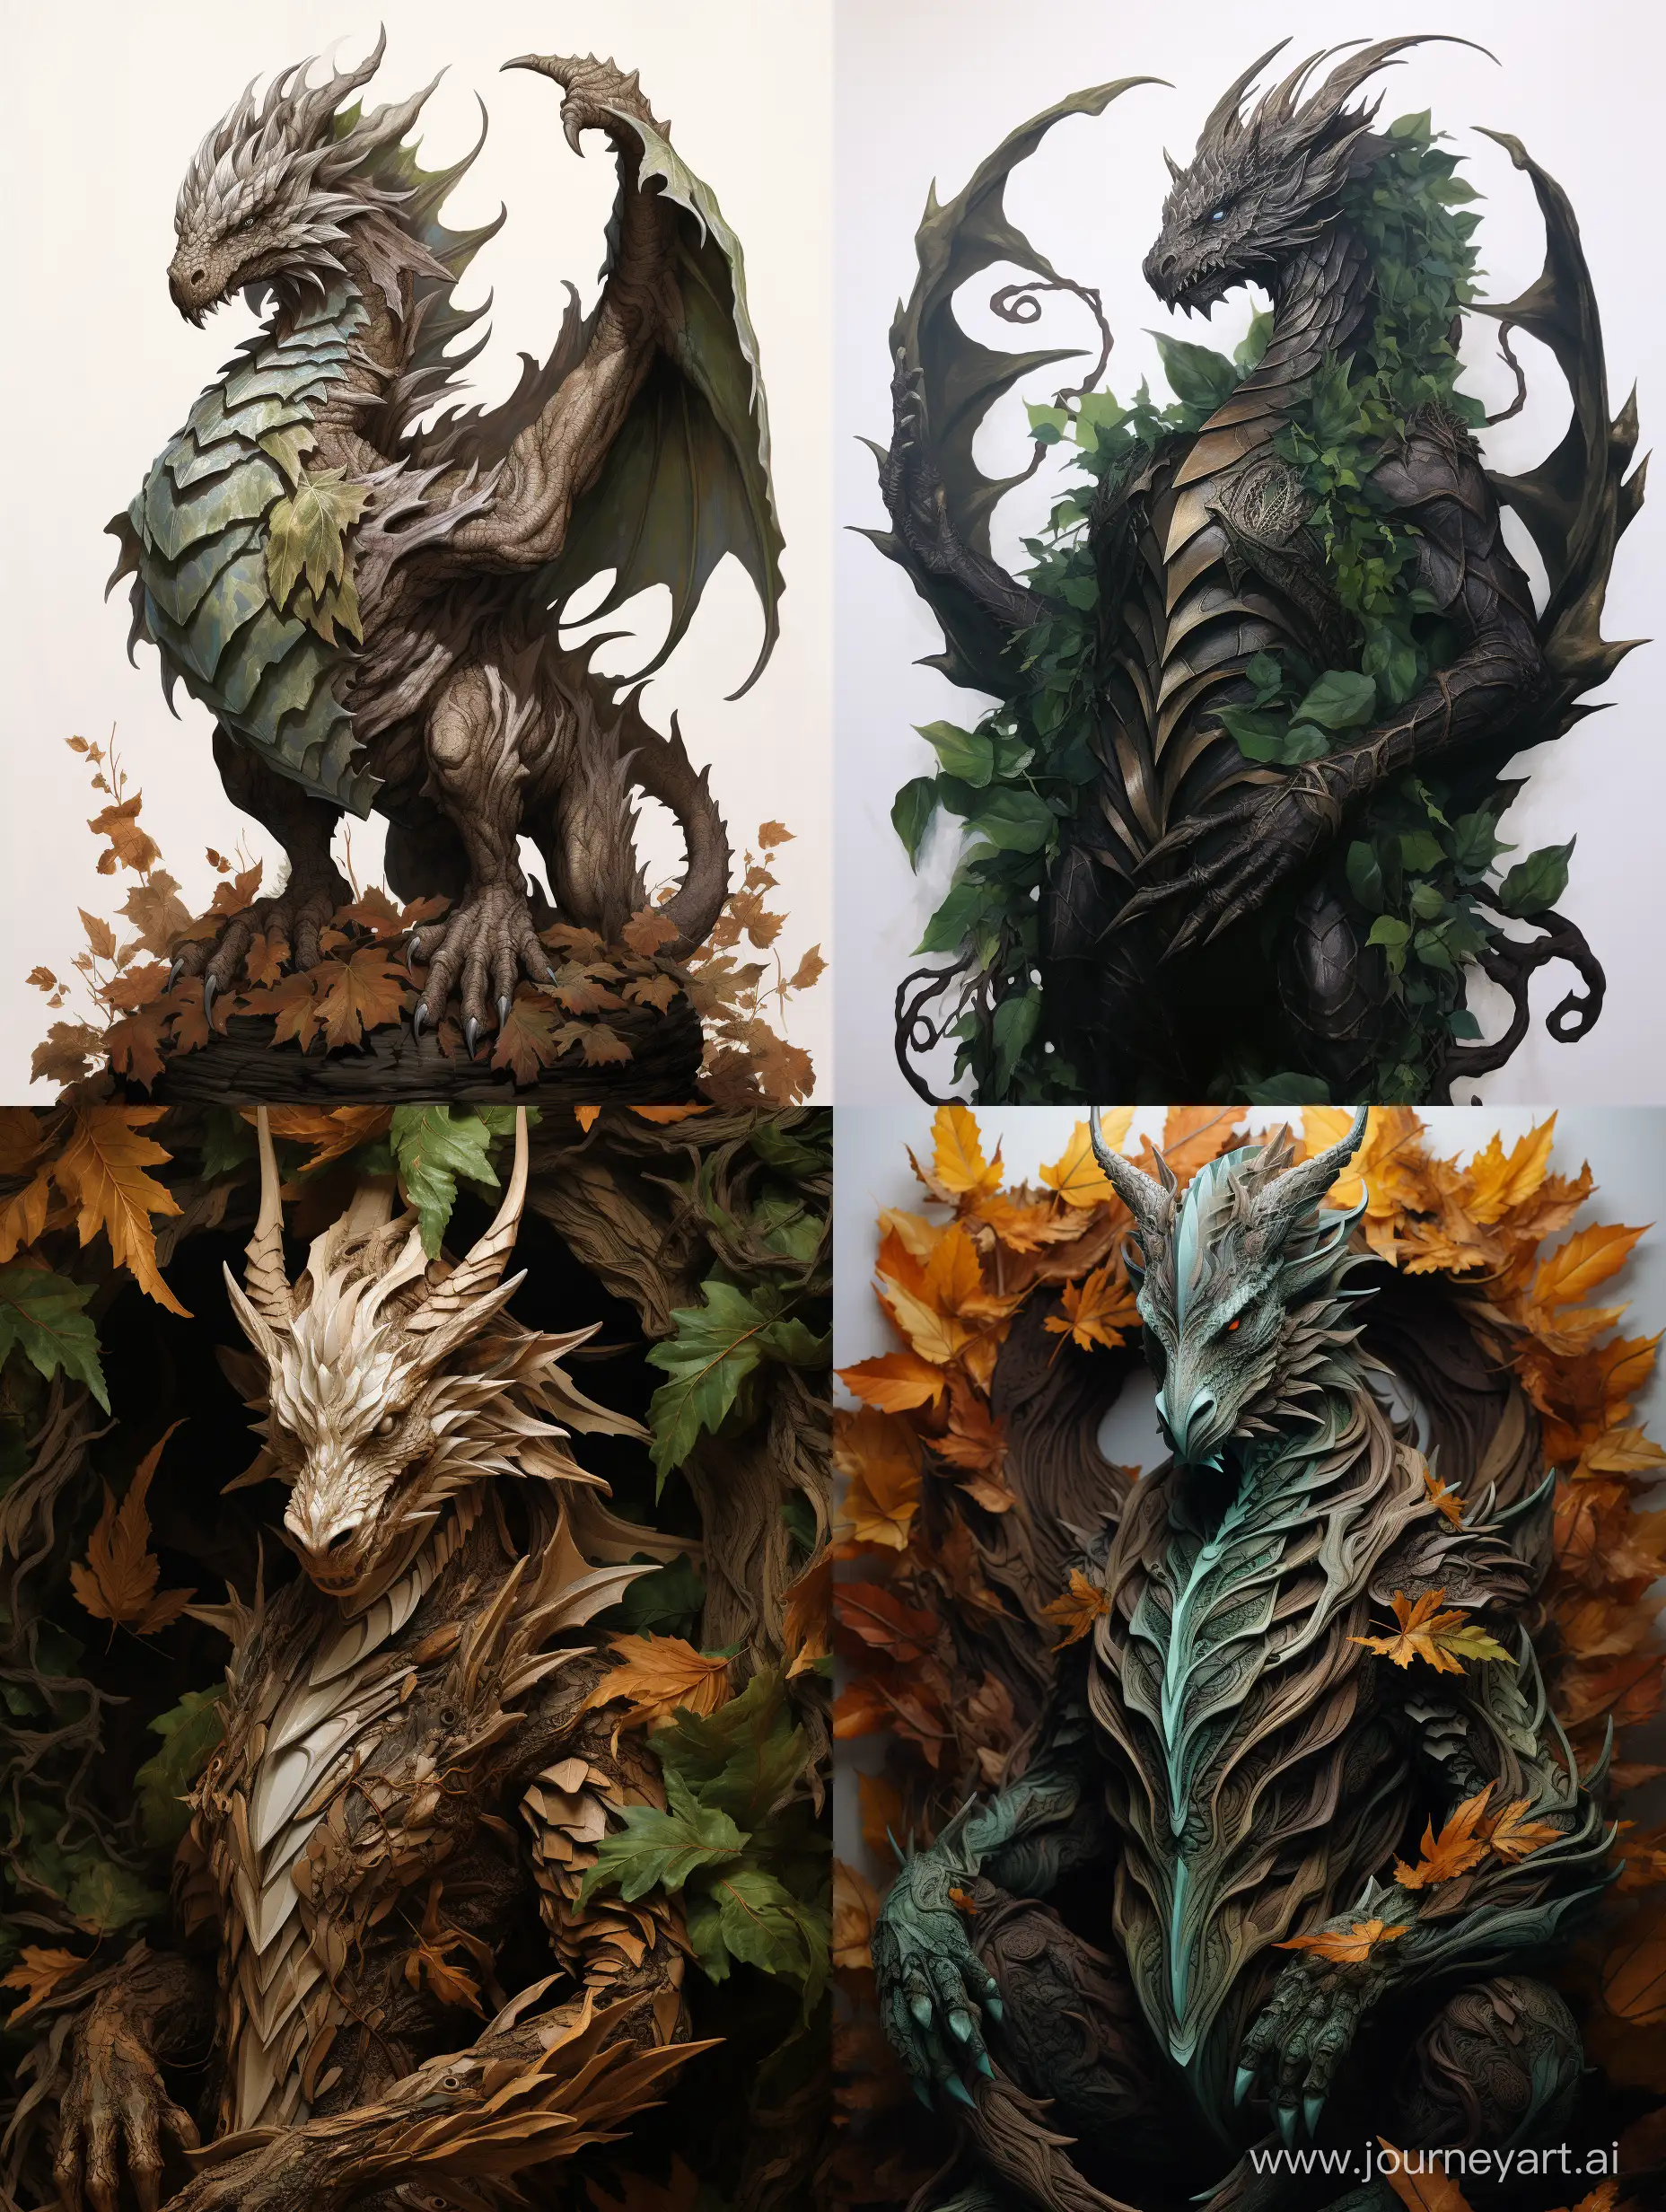 Majestic-Gothic-Dragon-Crafted-from-Oak-Leaves-Fantasy-Art